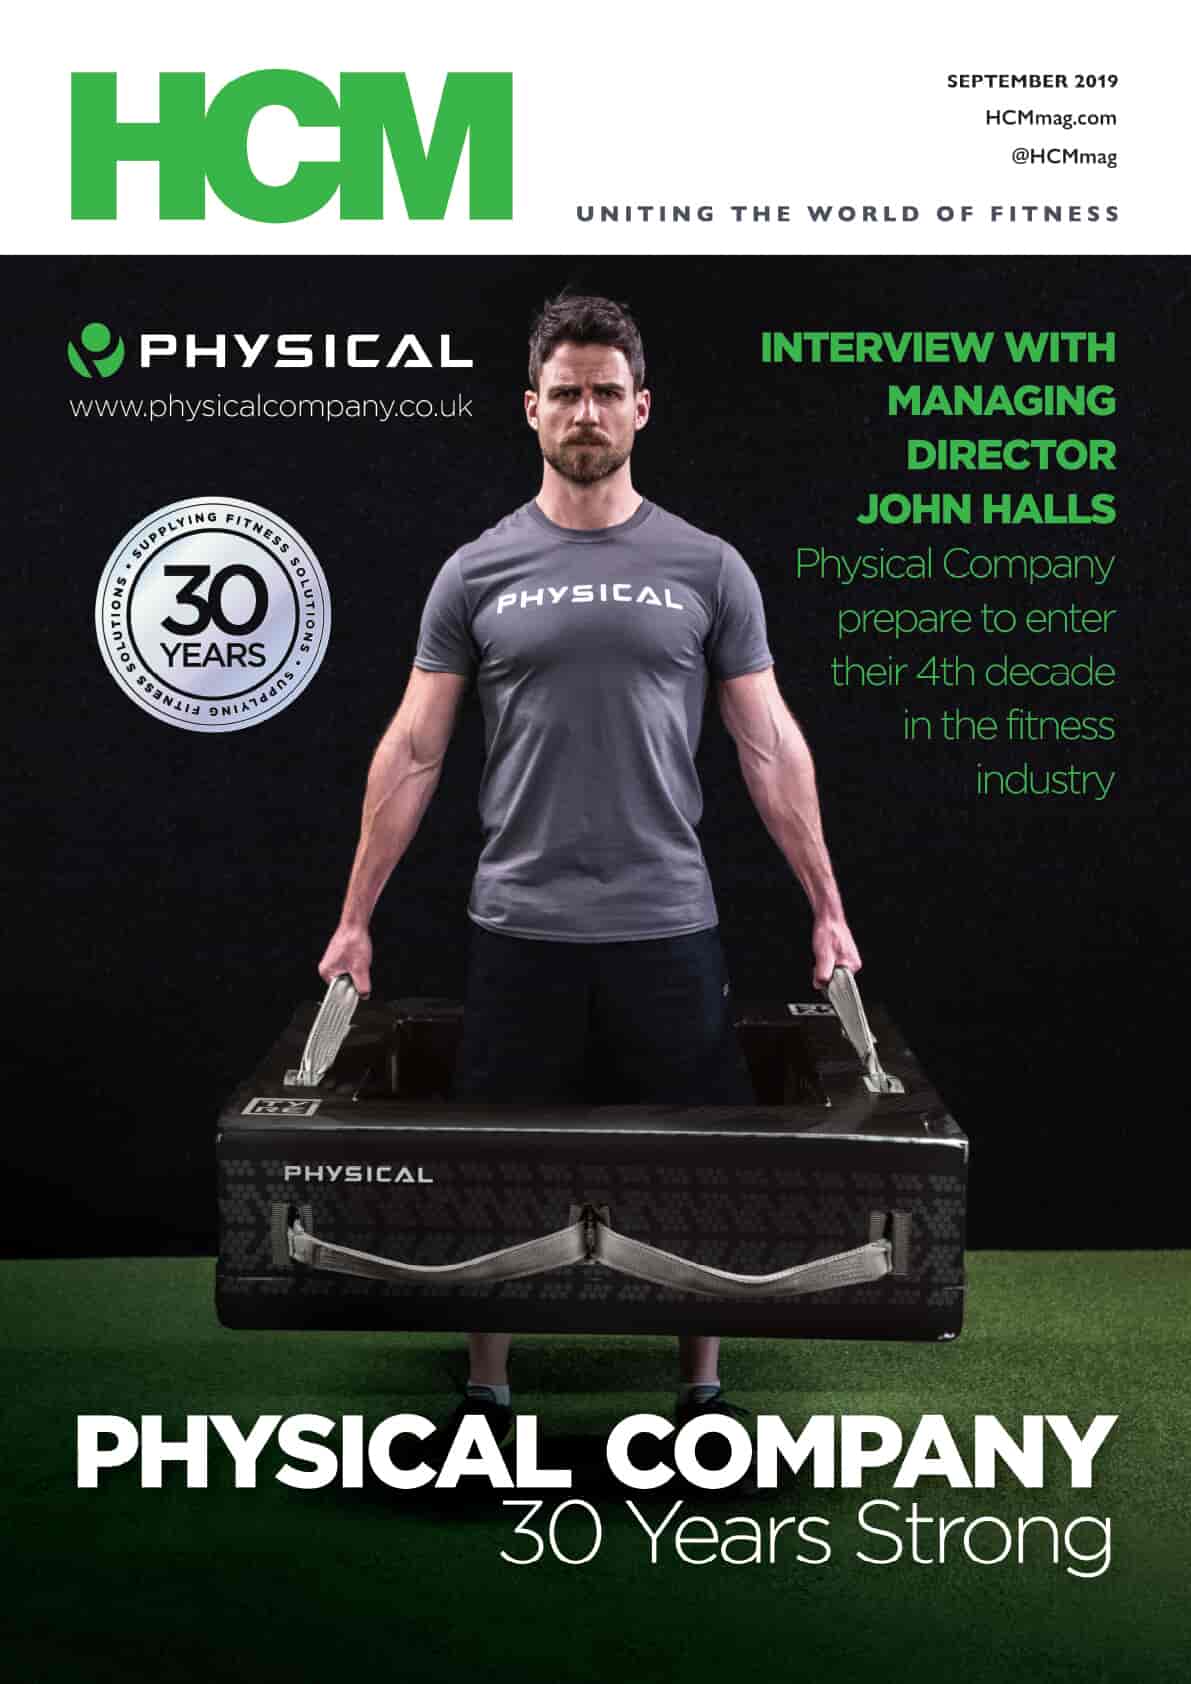 Physical Company | Health Club Management